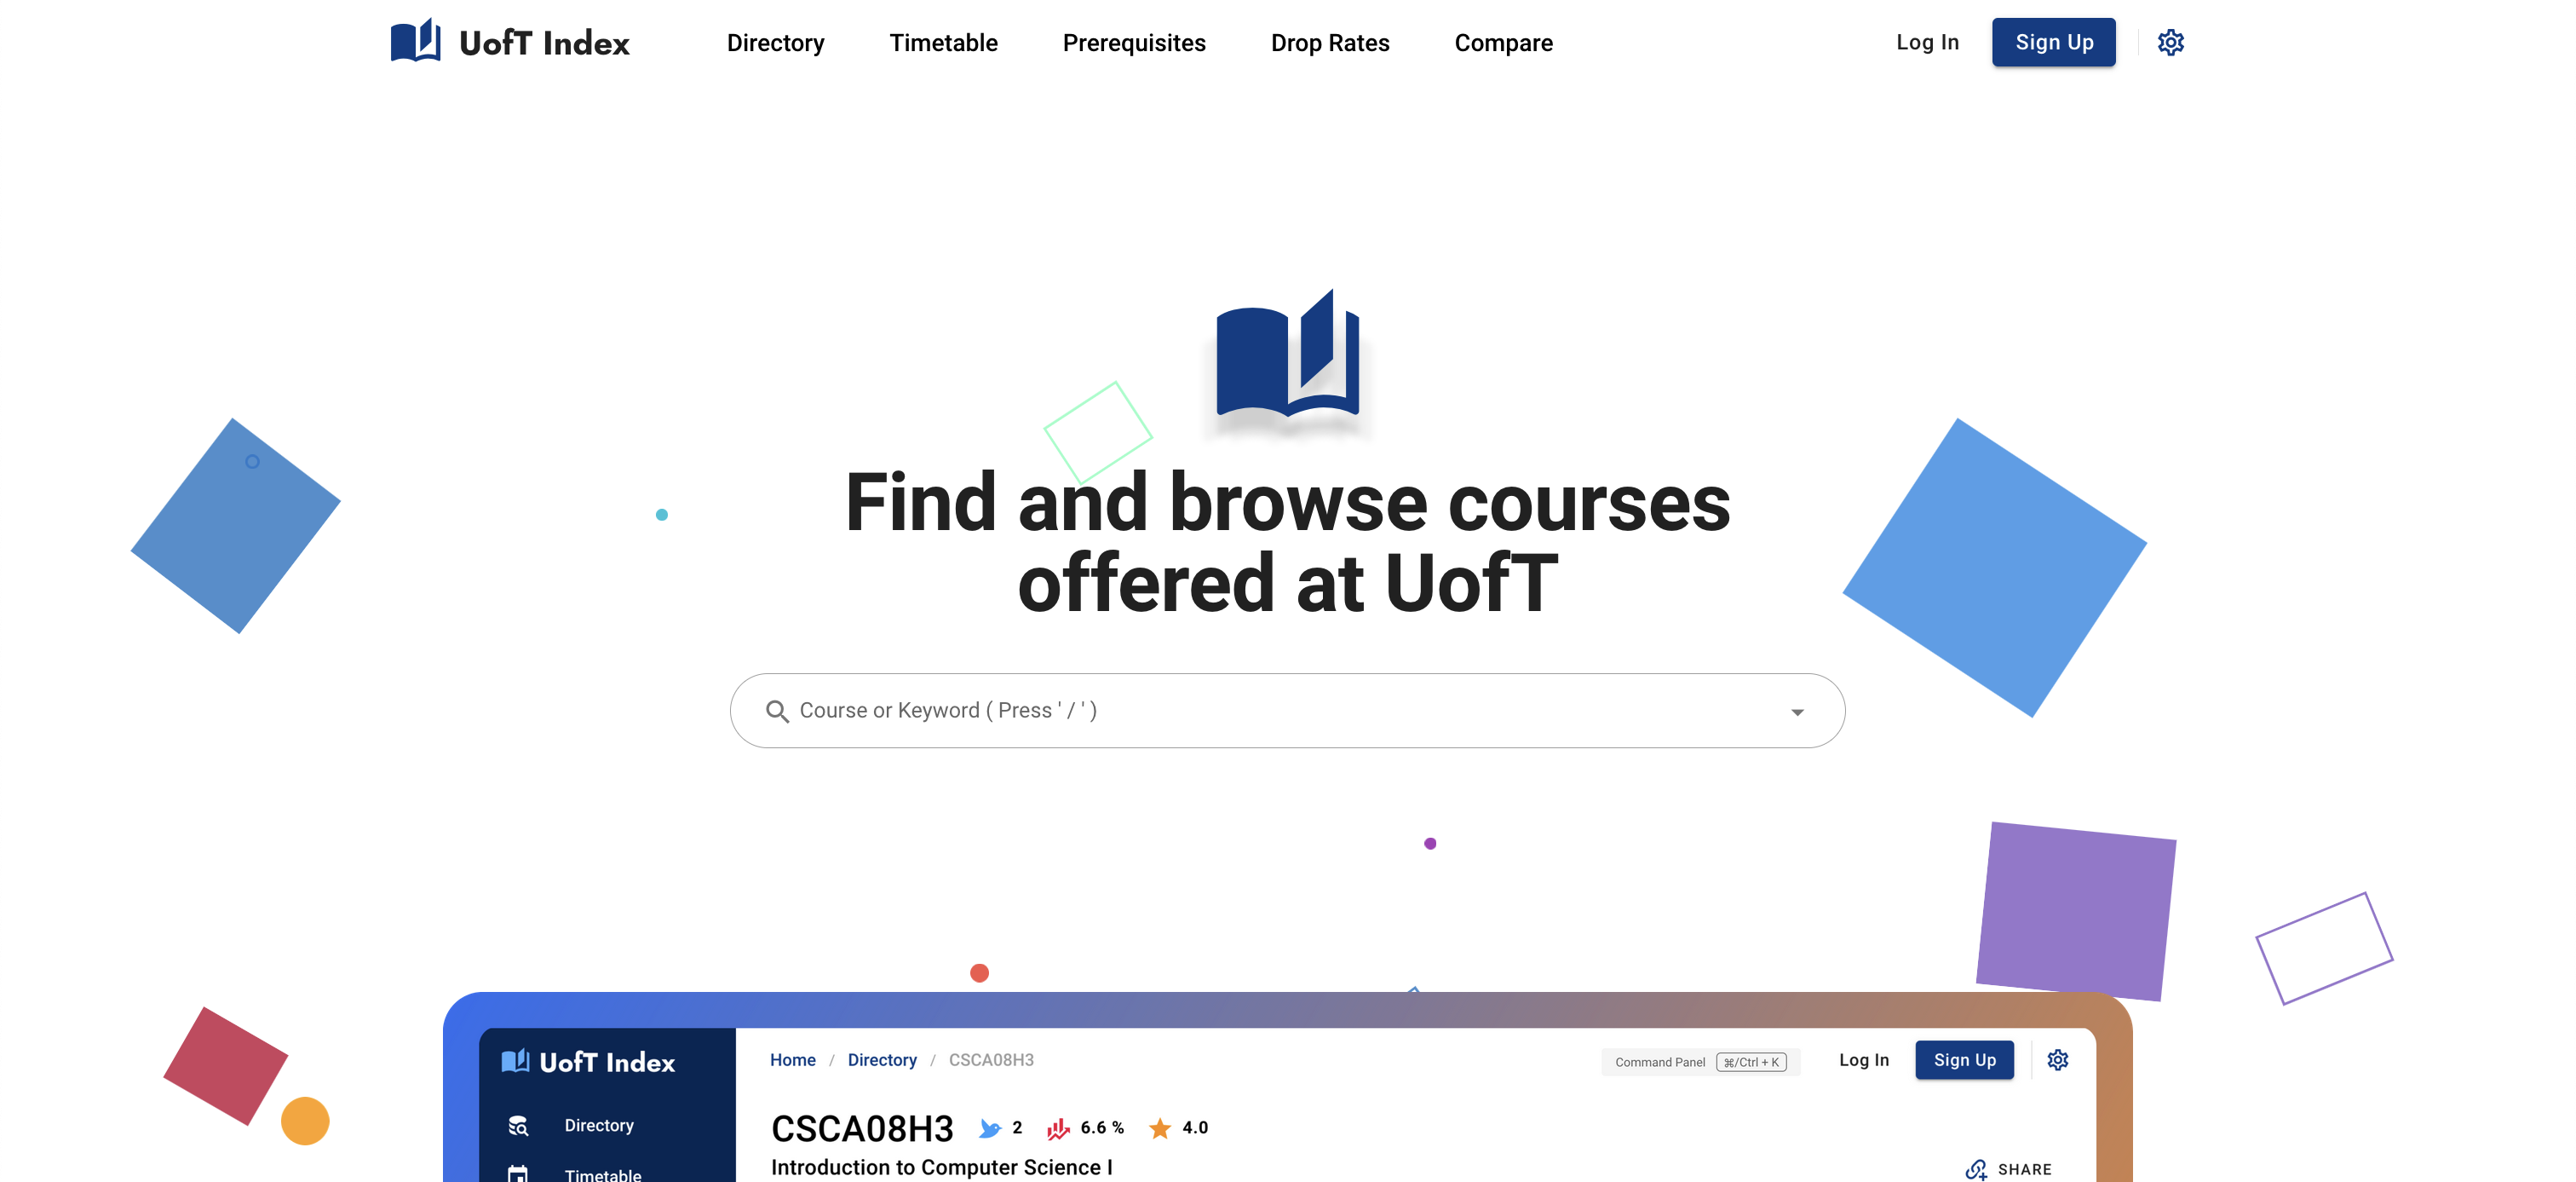 Courses, Ratings, Timetables, and More UofT Index